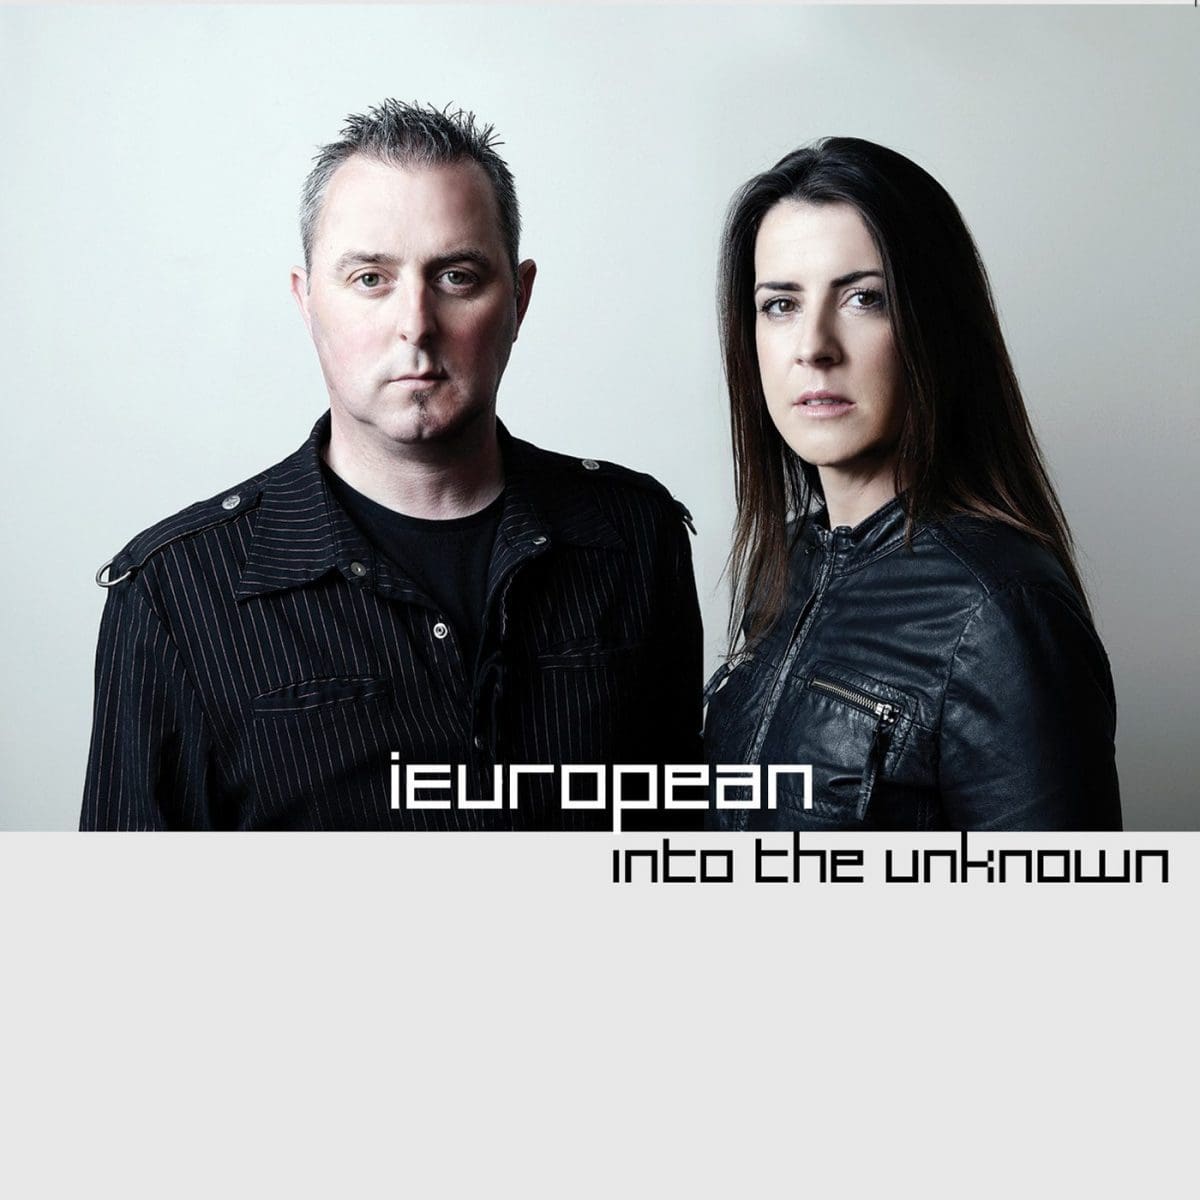 iEuropean - Into the unknown